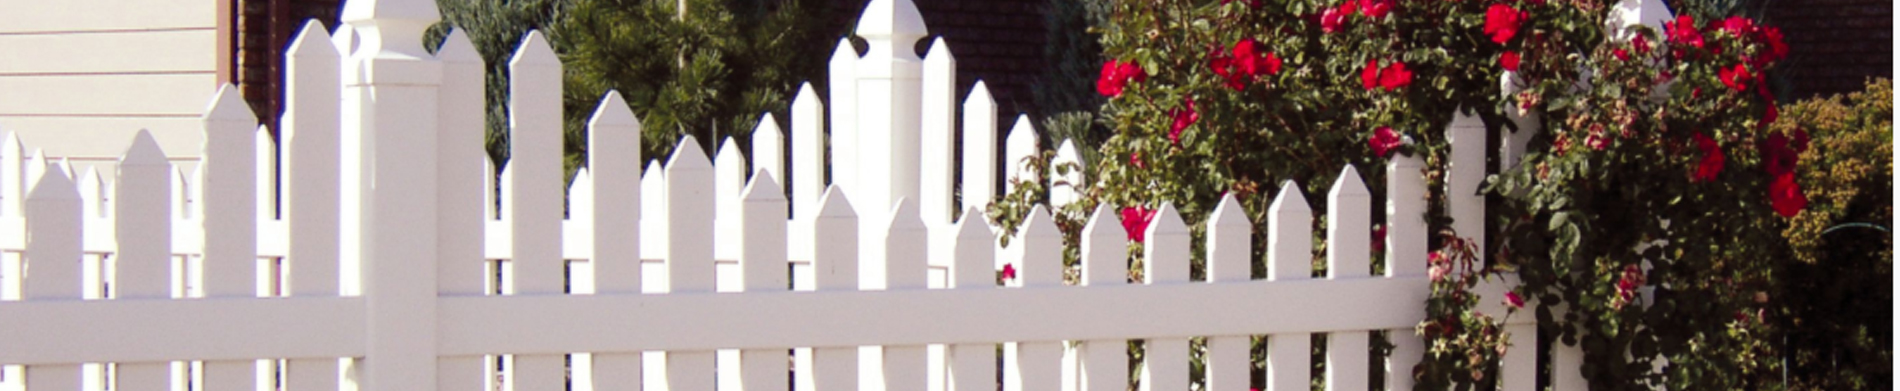 A perfect vinyl fence adds on to the beauty and offers security to your property